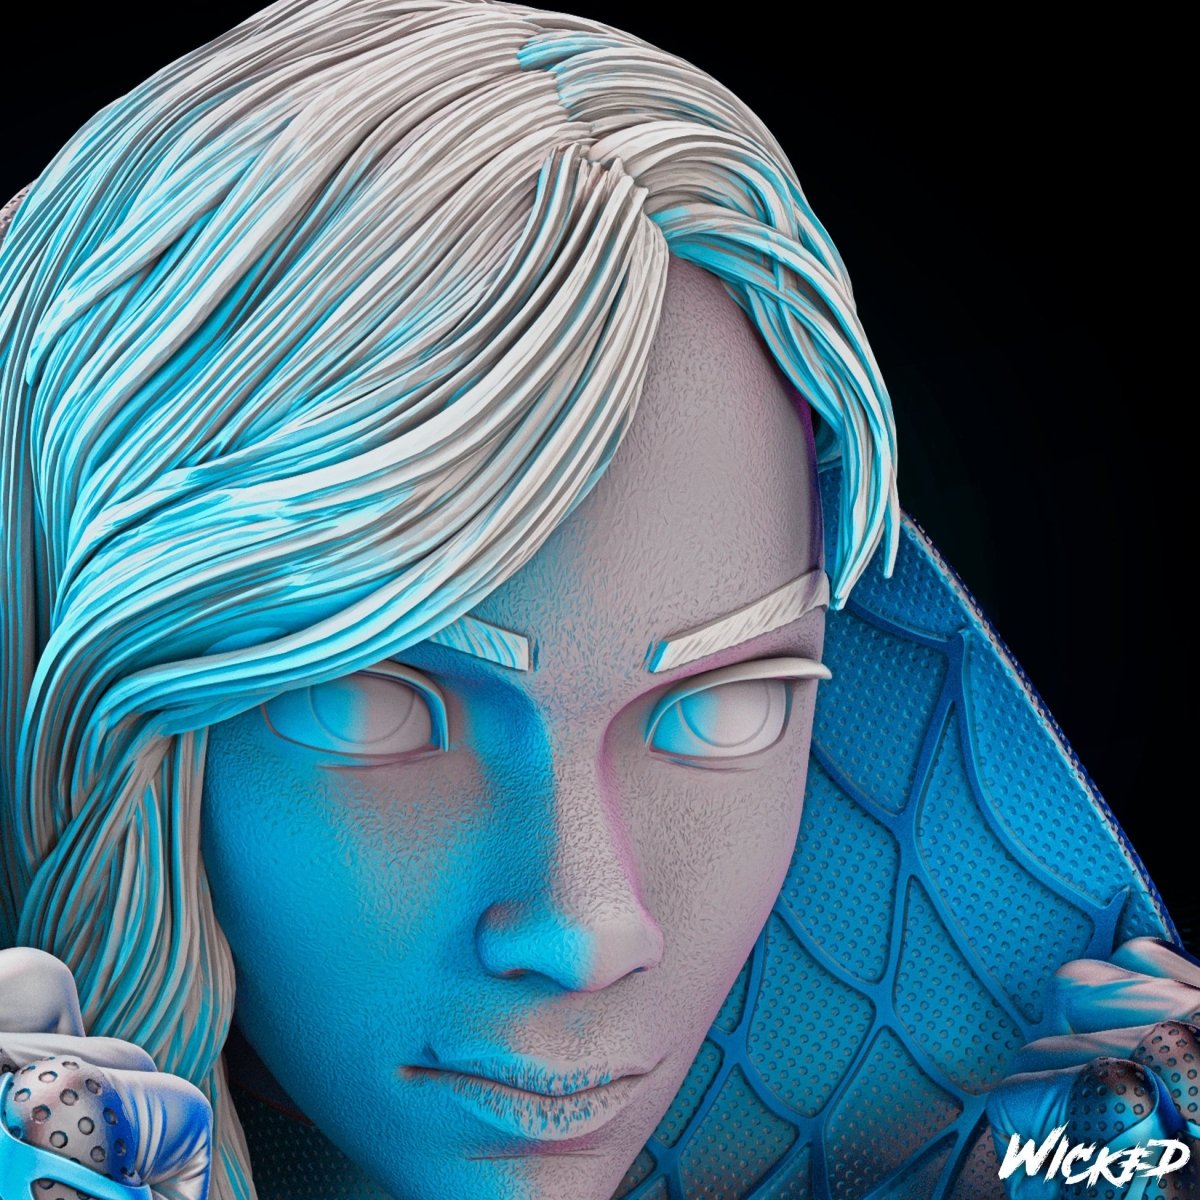 Spider Gwen BUST Resin 3D Printed Sculpture Movie Statue FunArt Diorama by Wicked